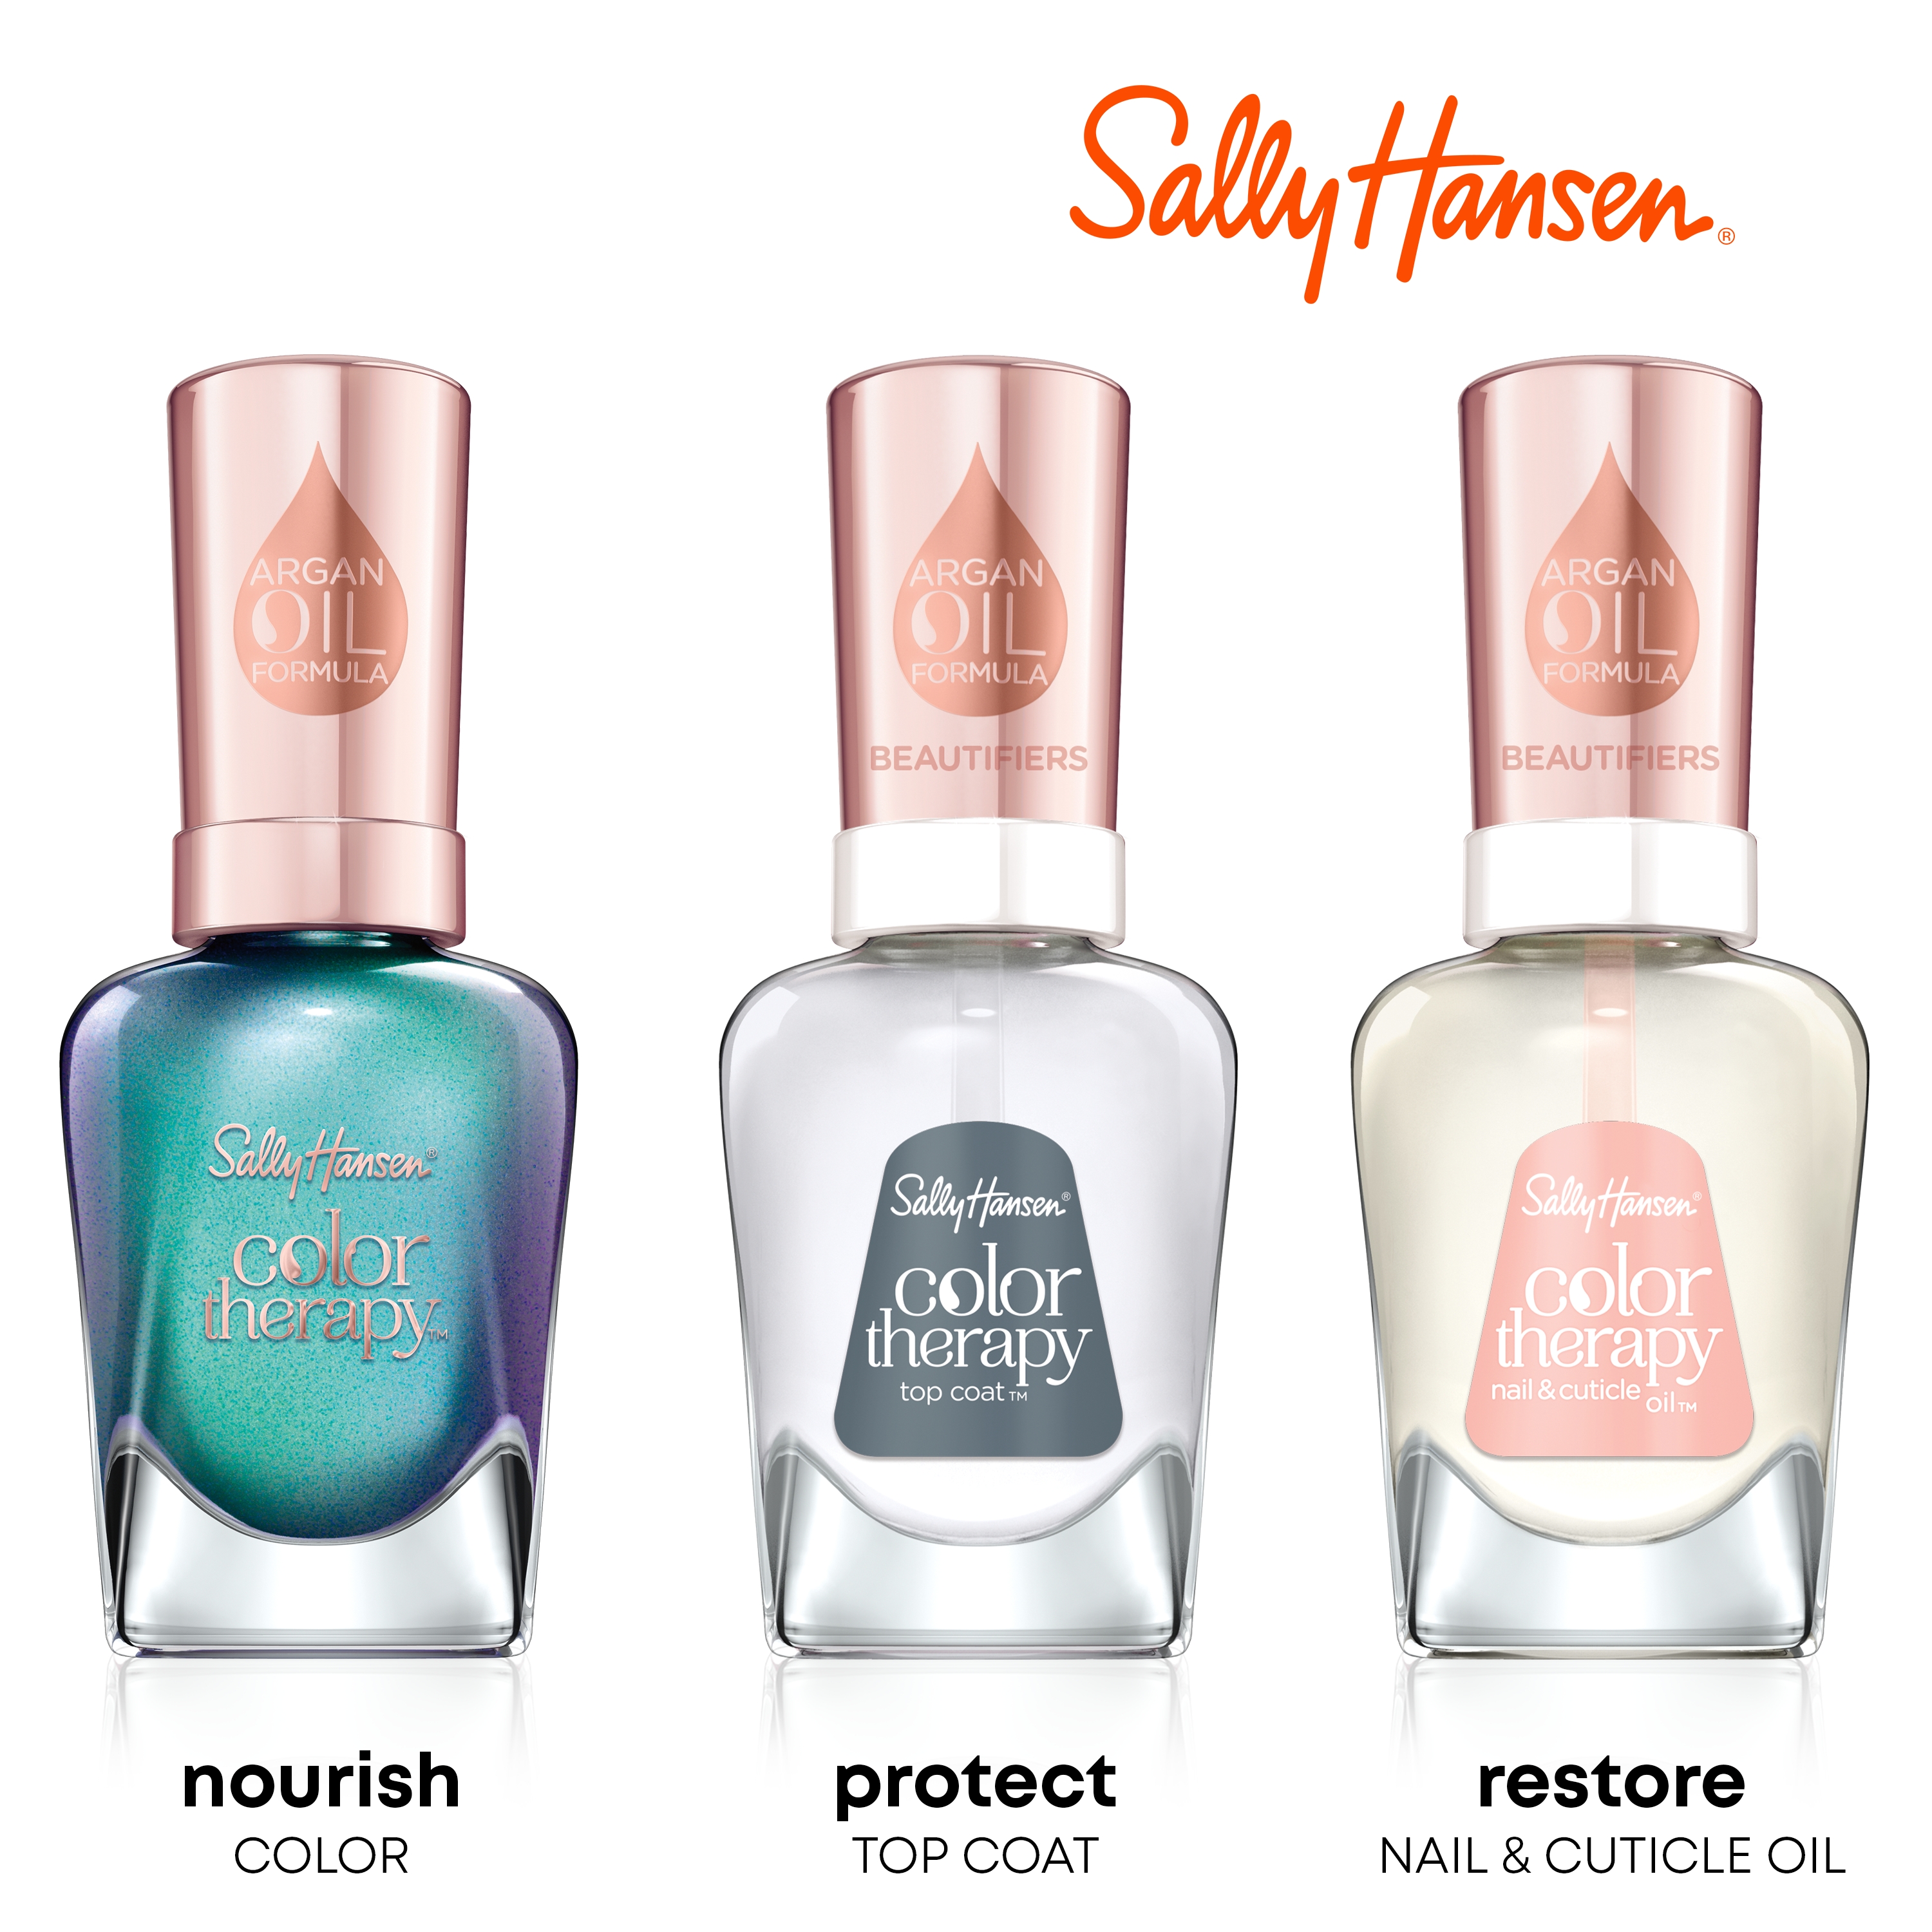 Sally Hansen Color Therapy Nail Color, Wine Therapy, 0.5 oz, Color Nail Polish, Nail Polish, Nail Polish Colors, Restorative, Argan Oil Formula, Instantly Moisturizes - image 5 of 13